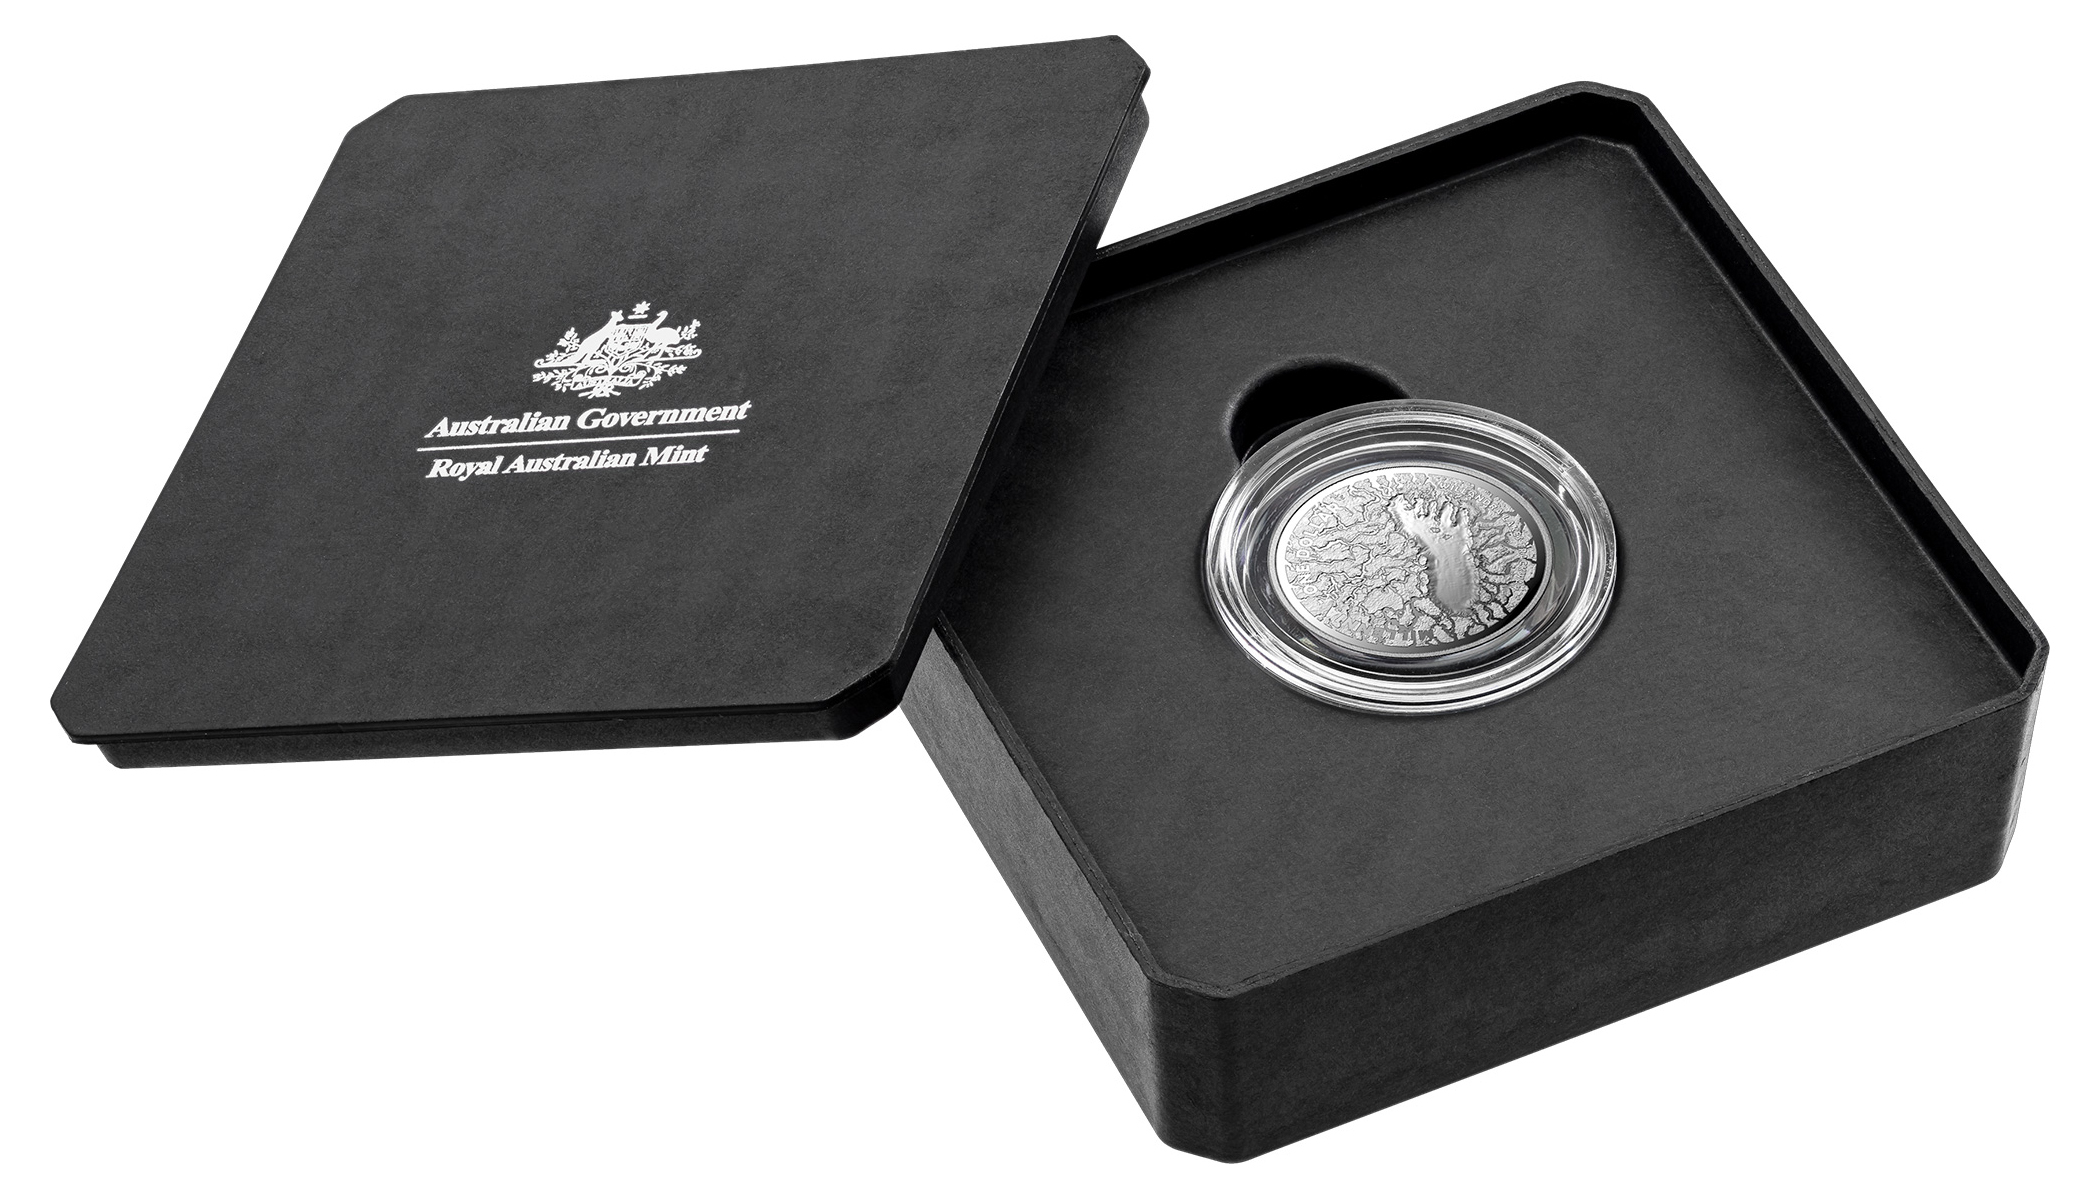 The Royal Australian Mint Molded Fibre Coin Packaging